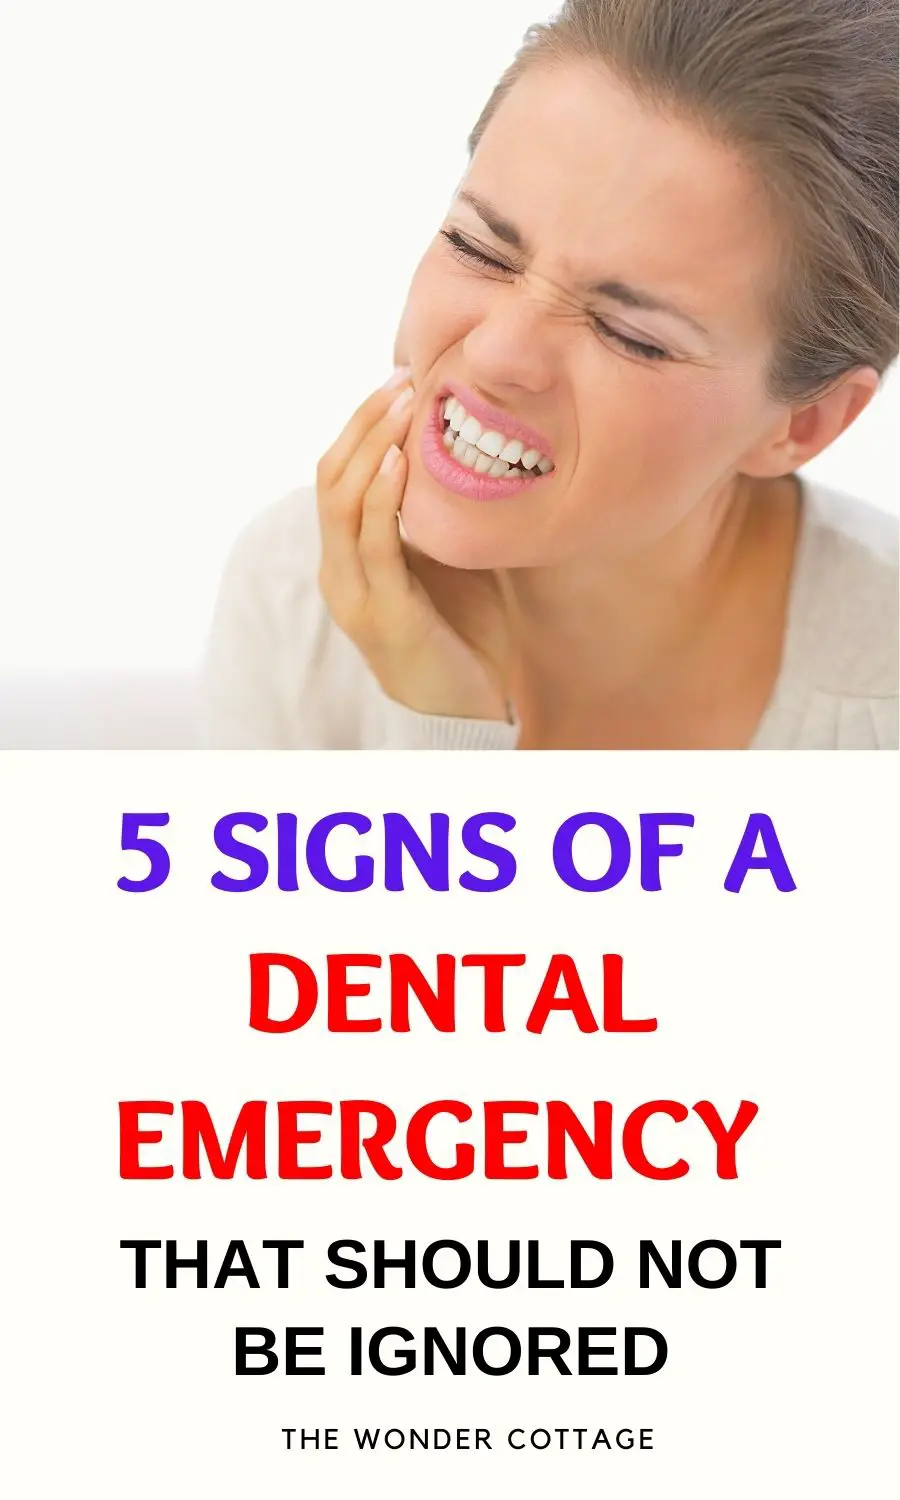 5 Signs Of A Dental Emergency That Should Not Be Ignored